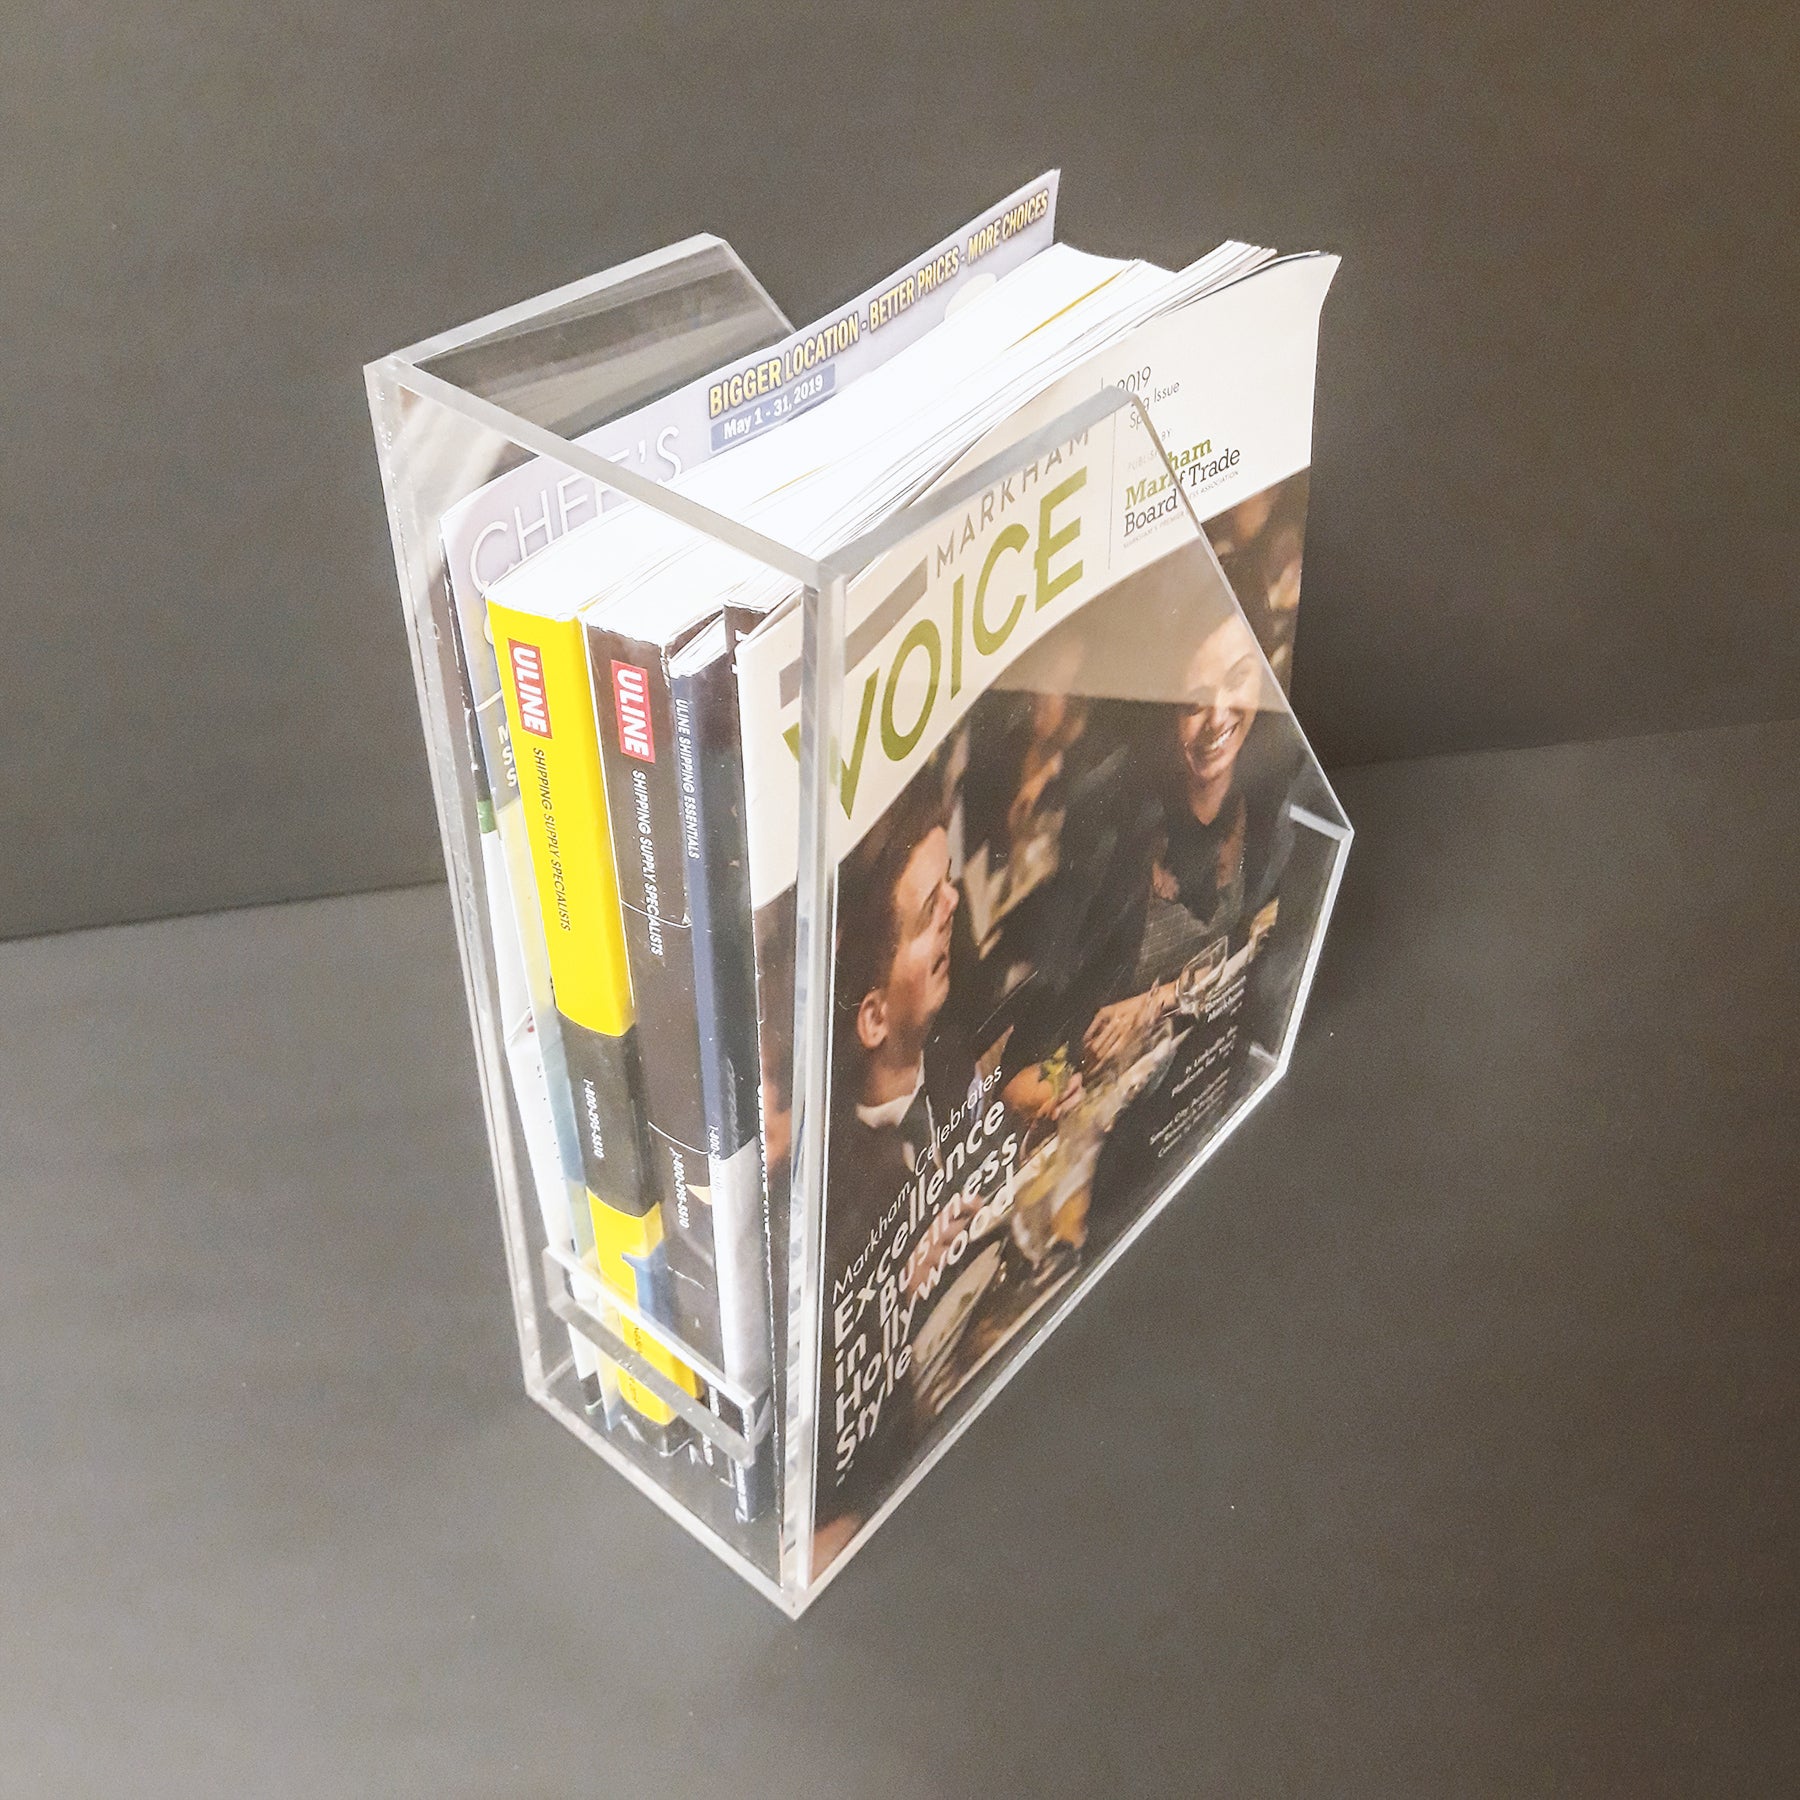 Clear Acrylic File Holder - Plastic Work Displays